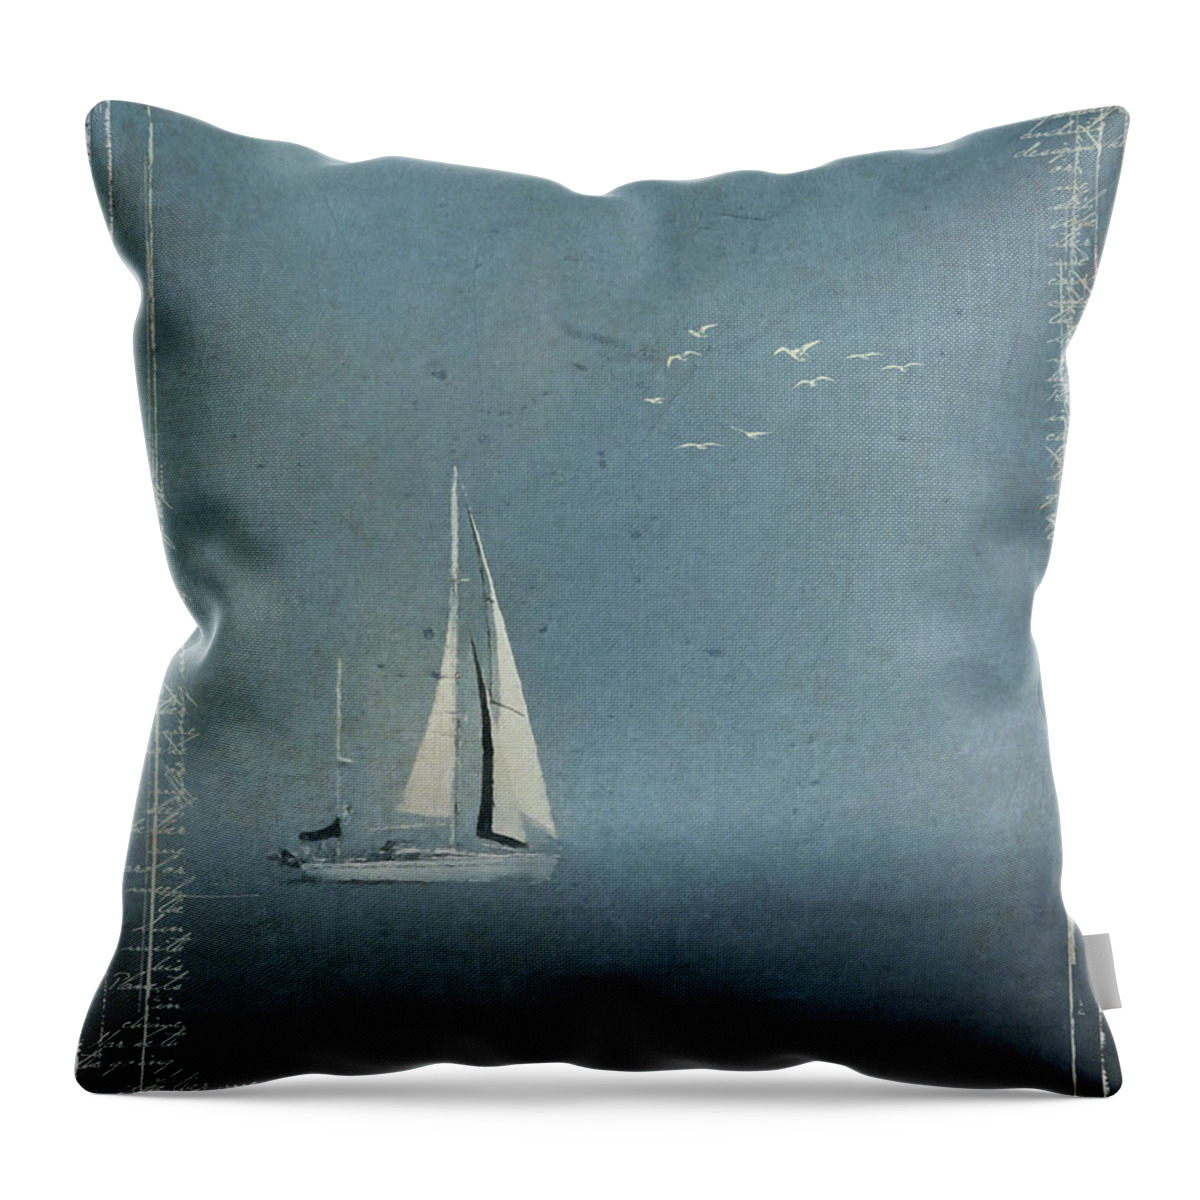 Blue Throw Pillow featuring the digital art Quietude by Linda Lee Hall